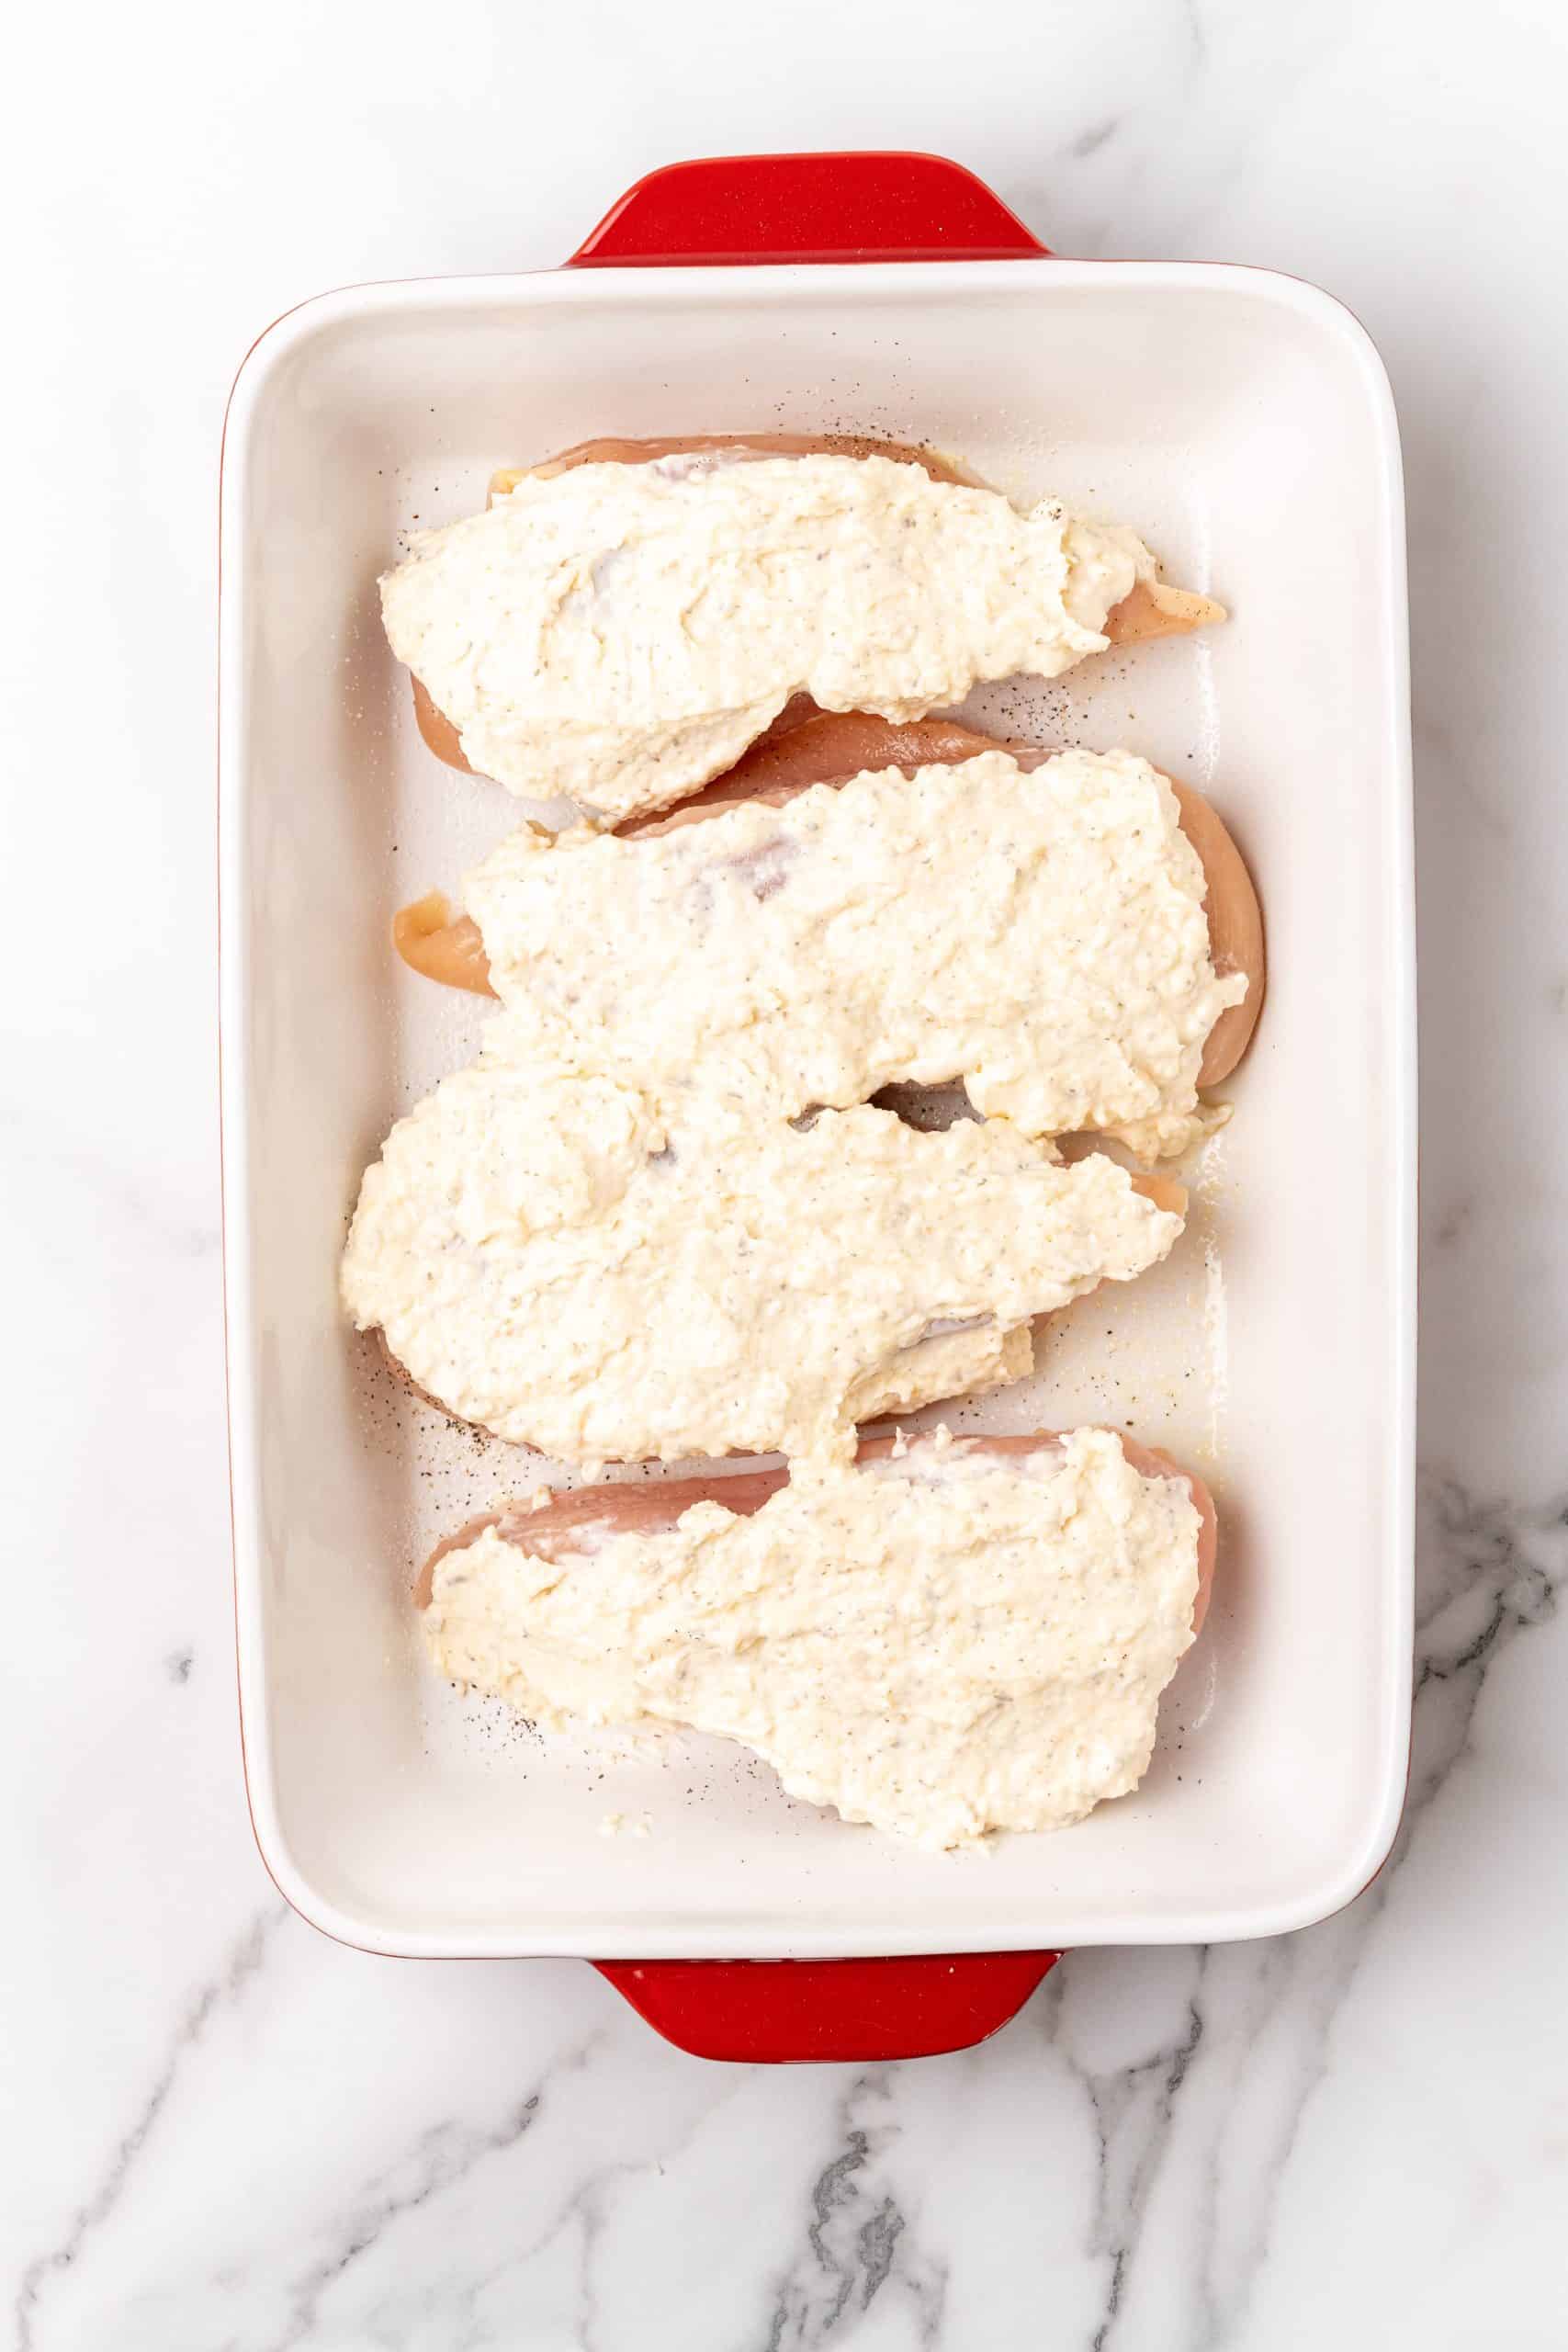 chicken breasts covered with a creamy cheese mayo mixture in a white baking dish